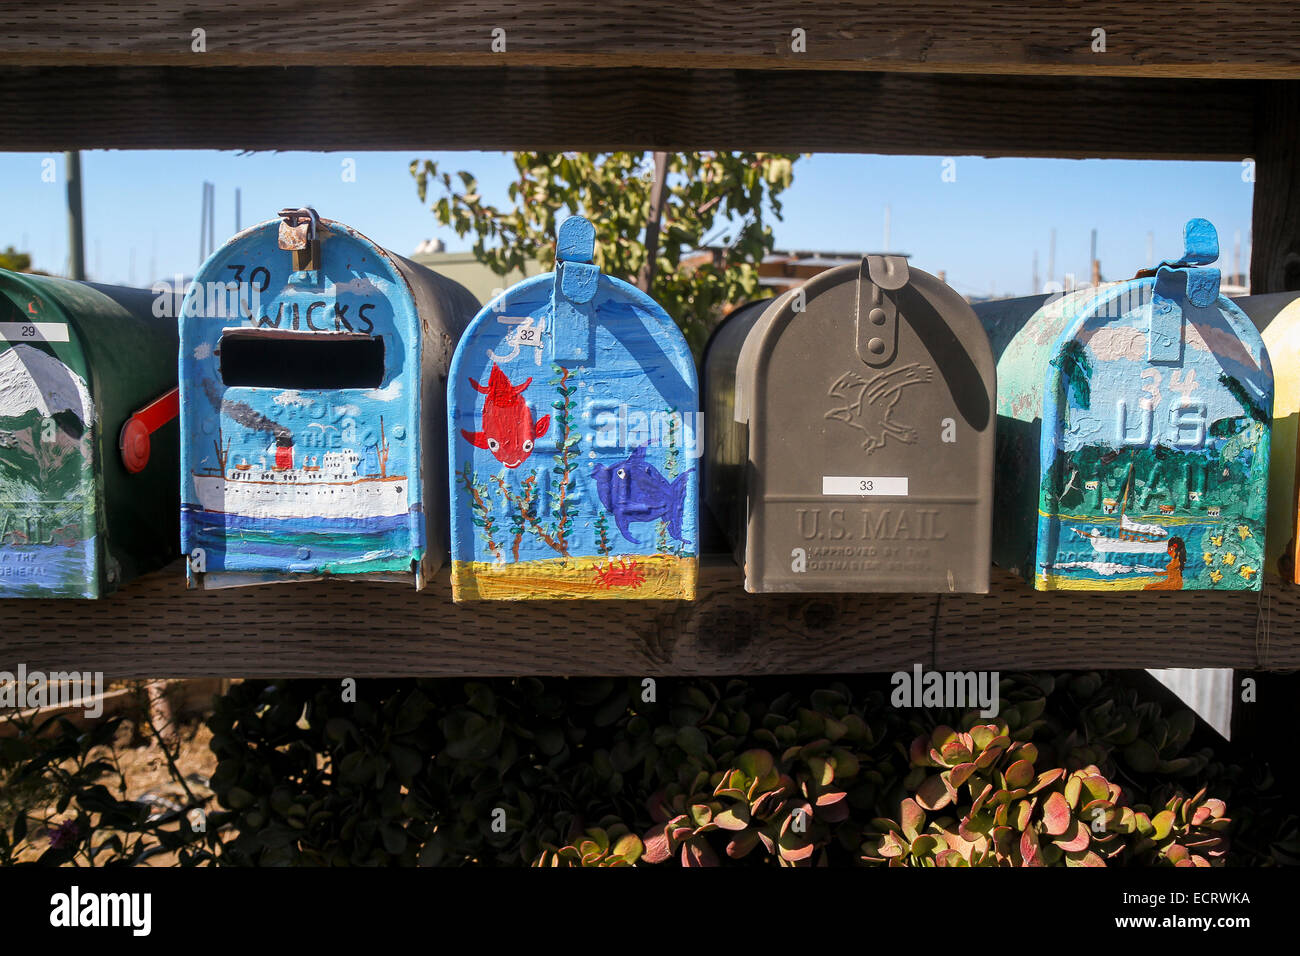 Colorful mailboxes for the residents of Galilee Harbor houseboats, Sausalito, California, United States Stock Photo